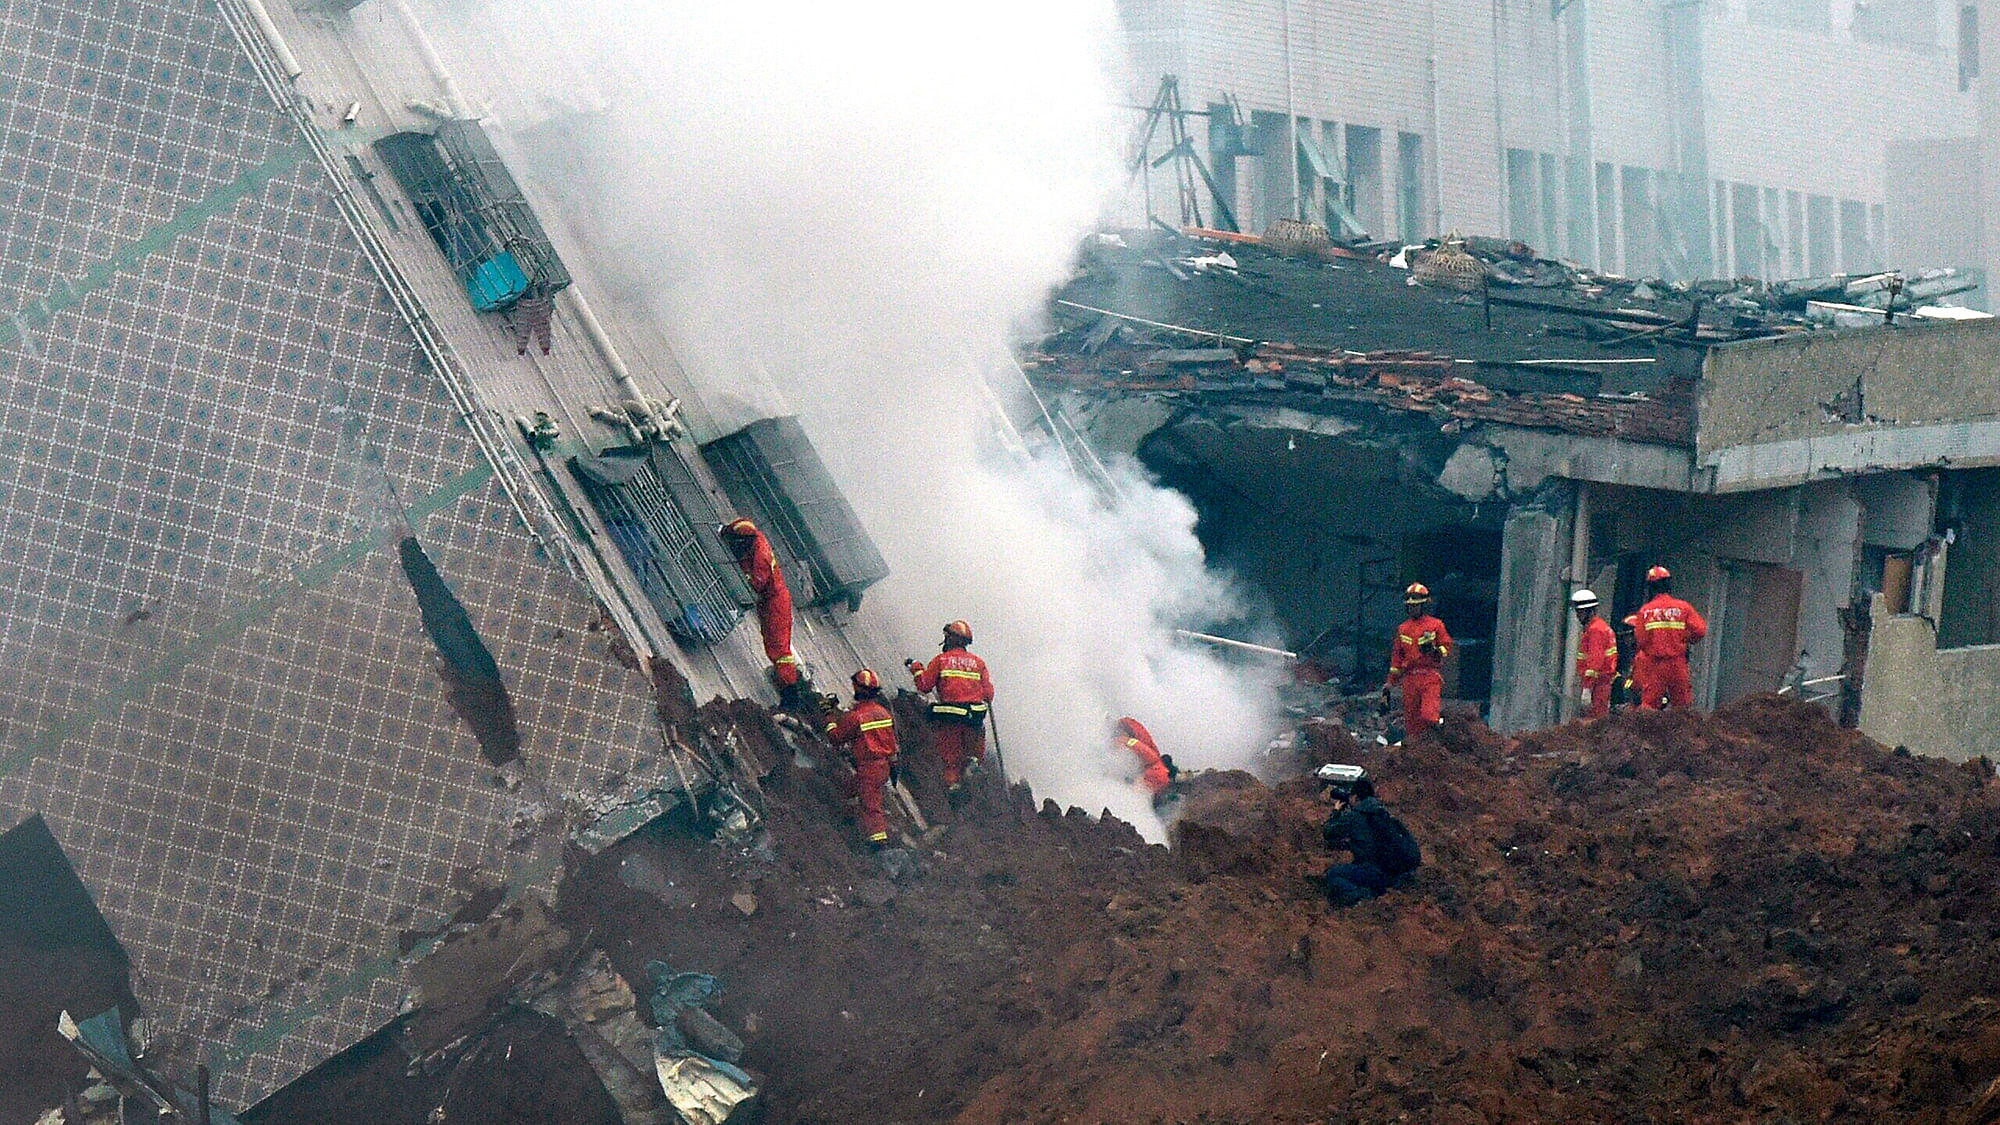 Rescuers search for survivors on a damaged building
following a landslide in south China. (Photo: AP) &nbsp; &nbsp; &nbsp;